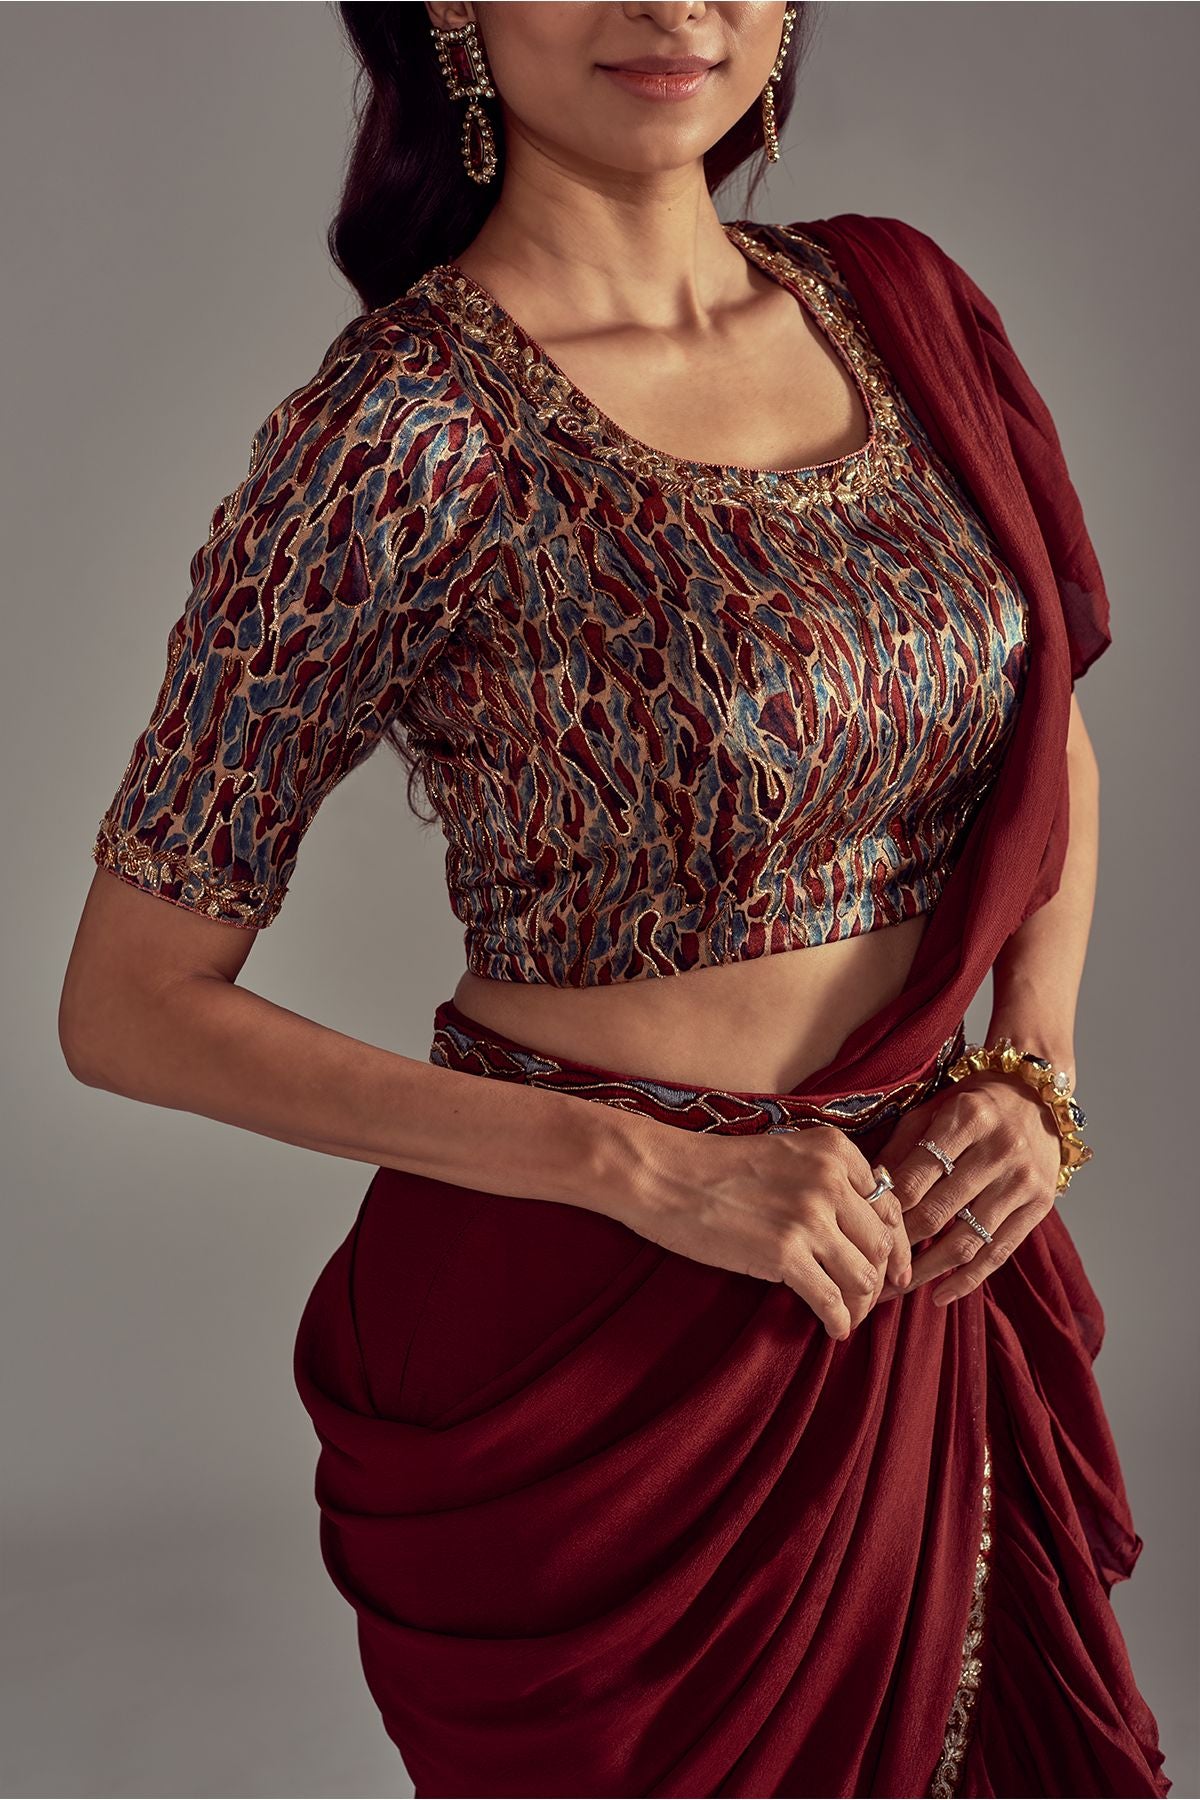 Exquisite Maroon Ruffled Saree paired with an Ajrakh Printed Blouse featuring Intricate Embroidery in Mashru Silk, complemented by a Fully Handcrafted Waistband